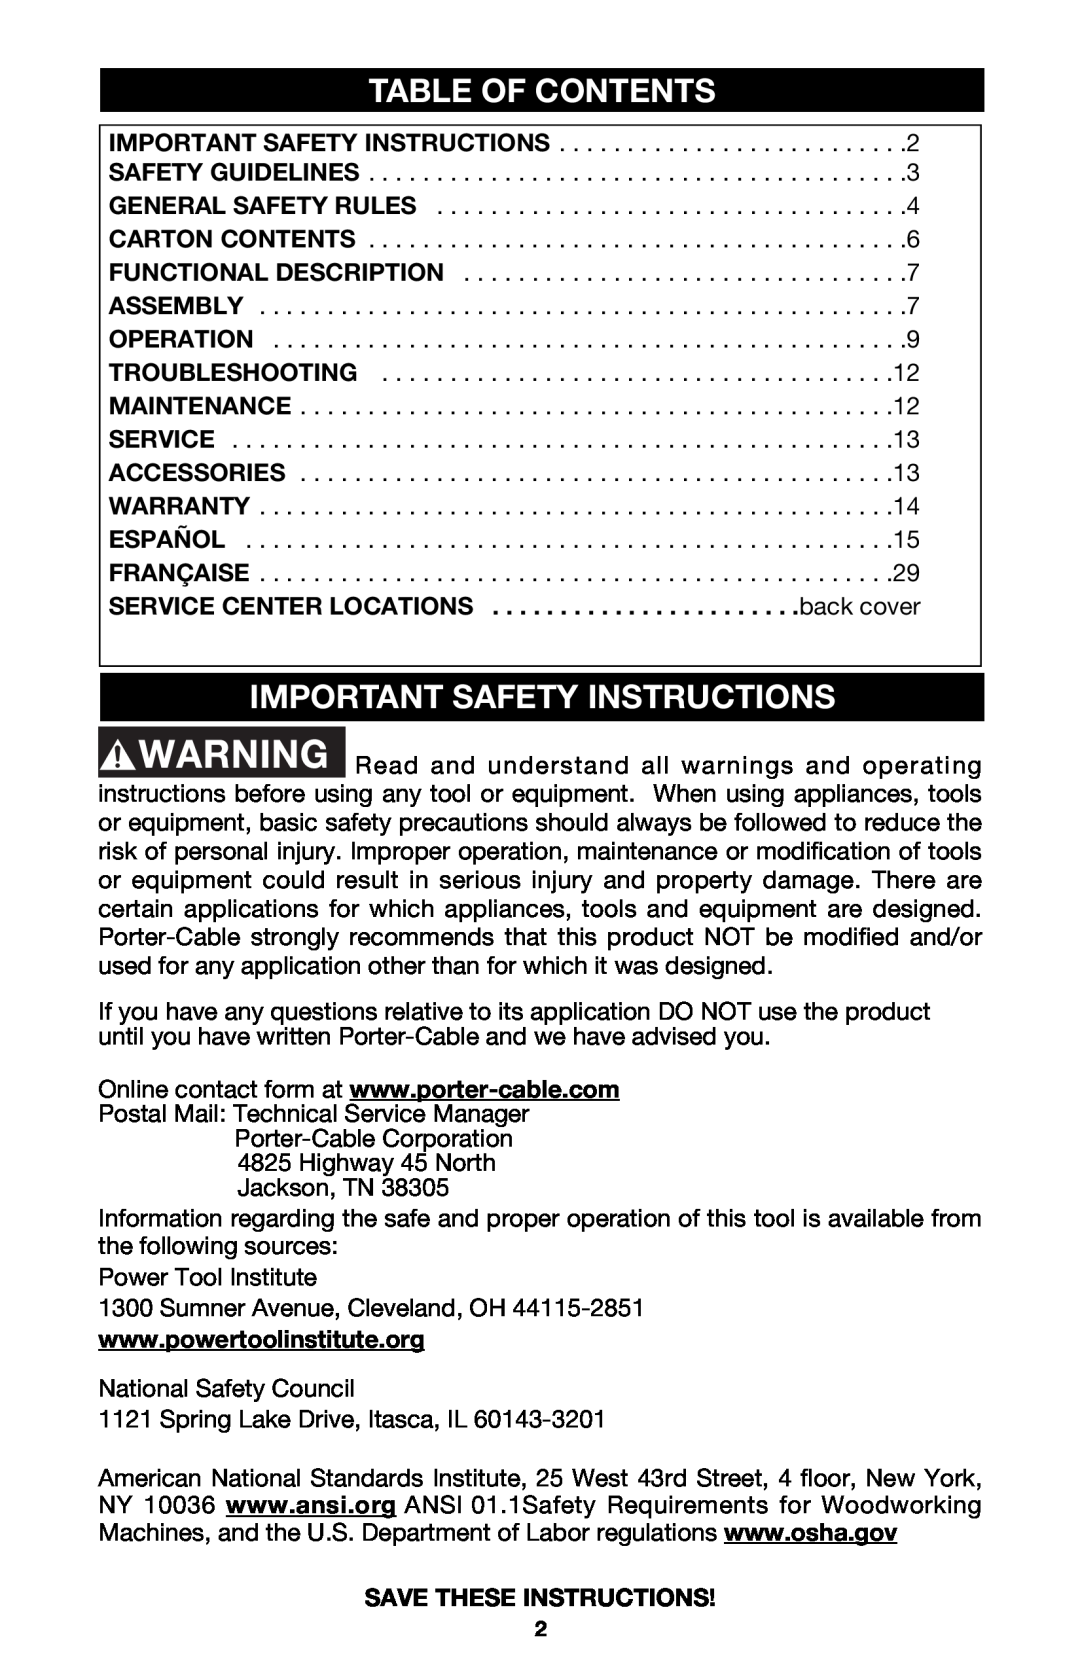 Porter-Cable 7814 instruction manual Table Of Contents, Important Safety Instructions 